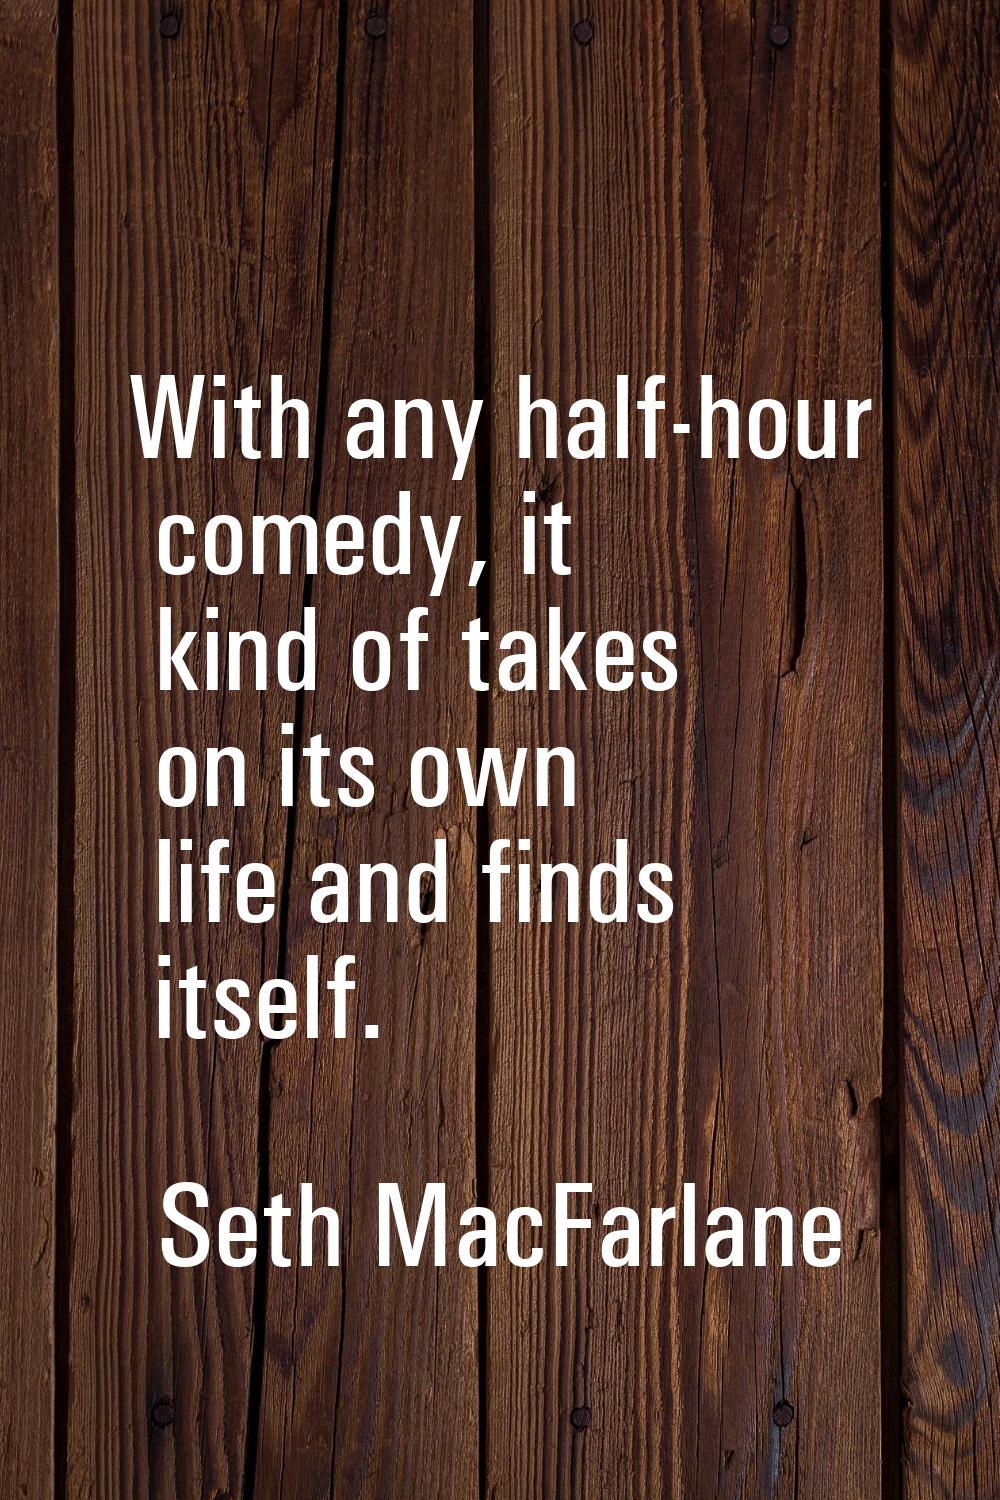 With any half-hour comedy, it kind of takes on its own life and finds itself.